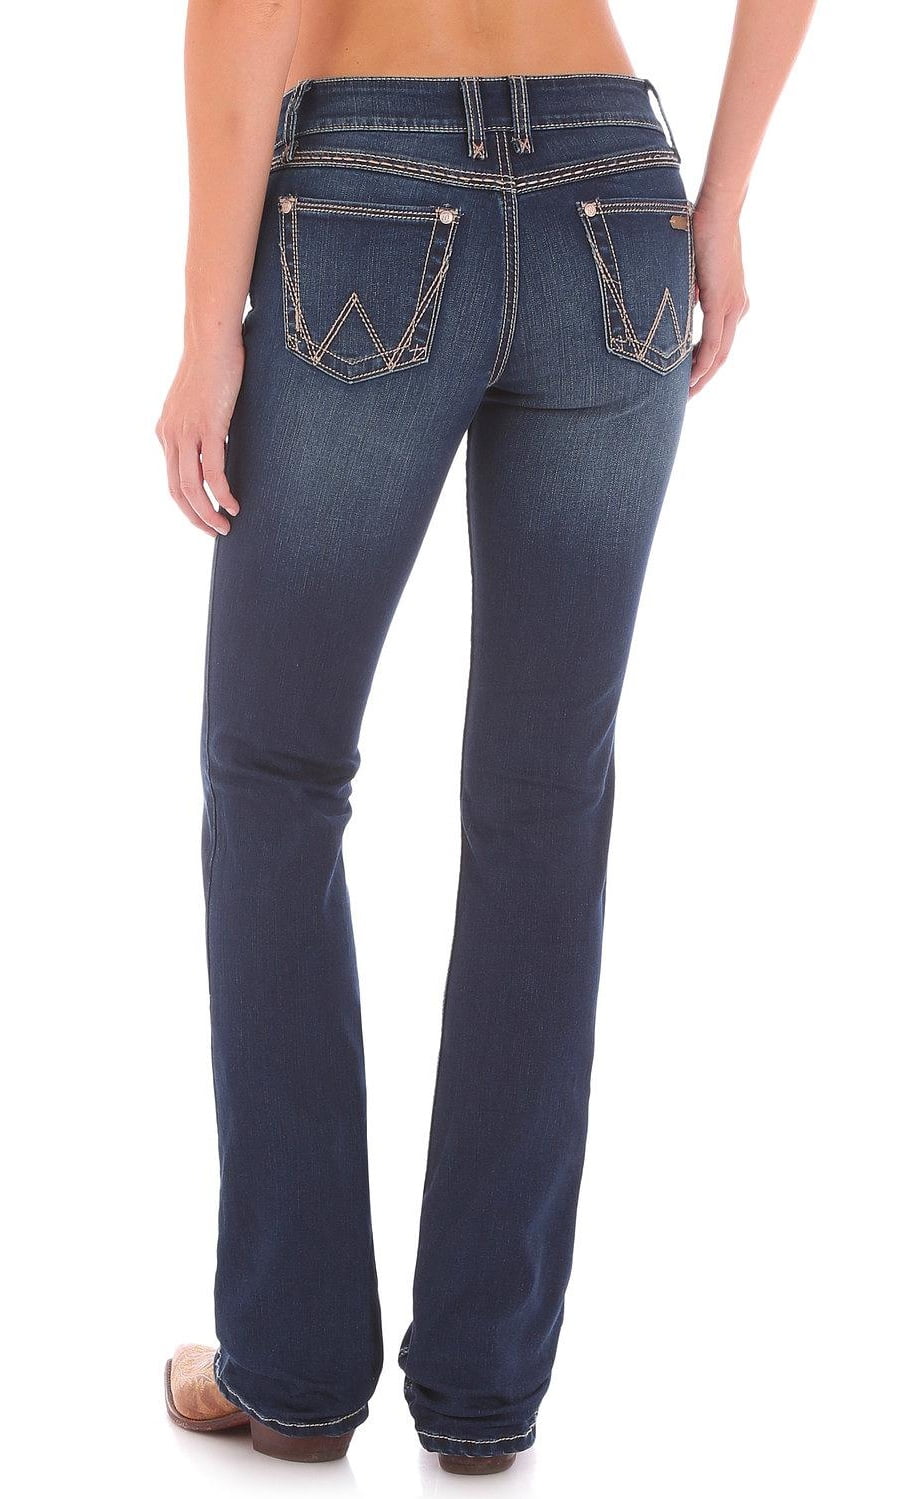 womens jeans with design on back pocket